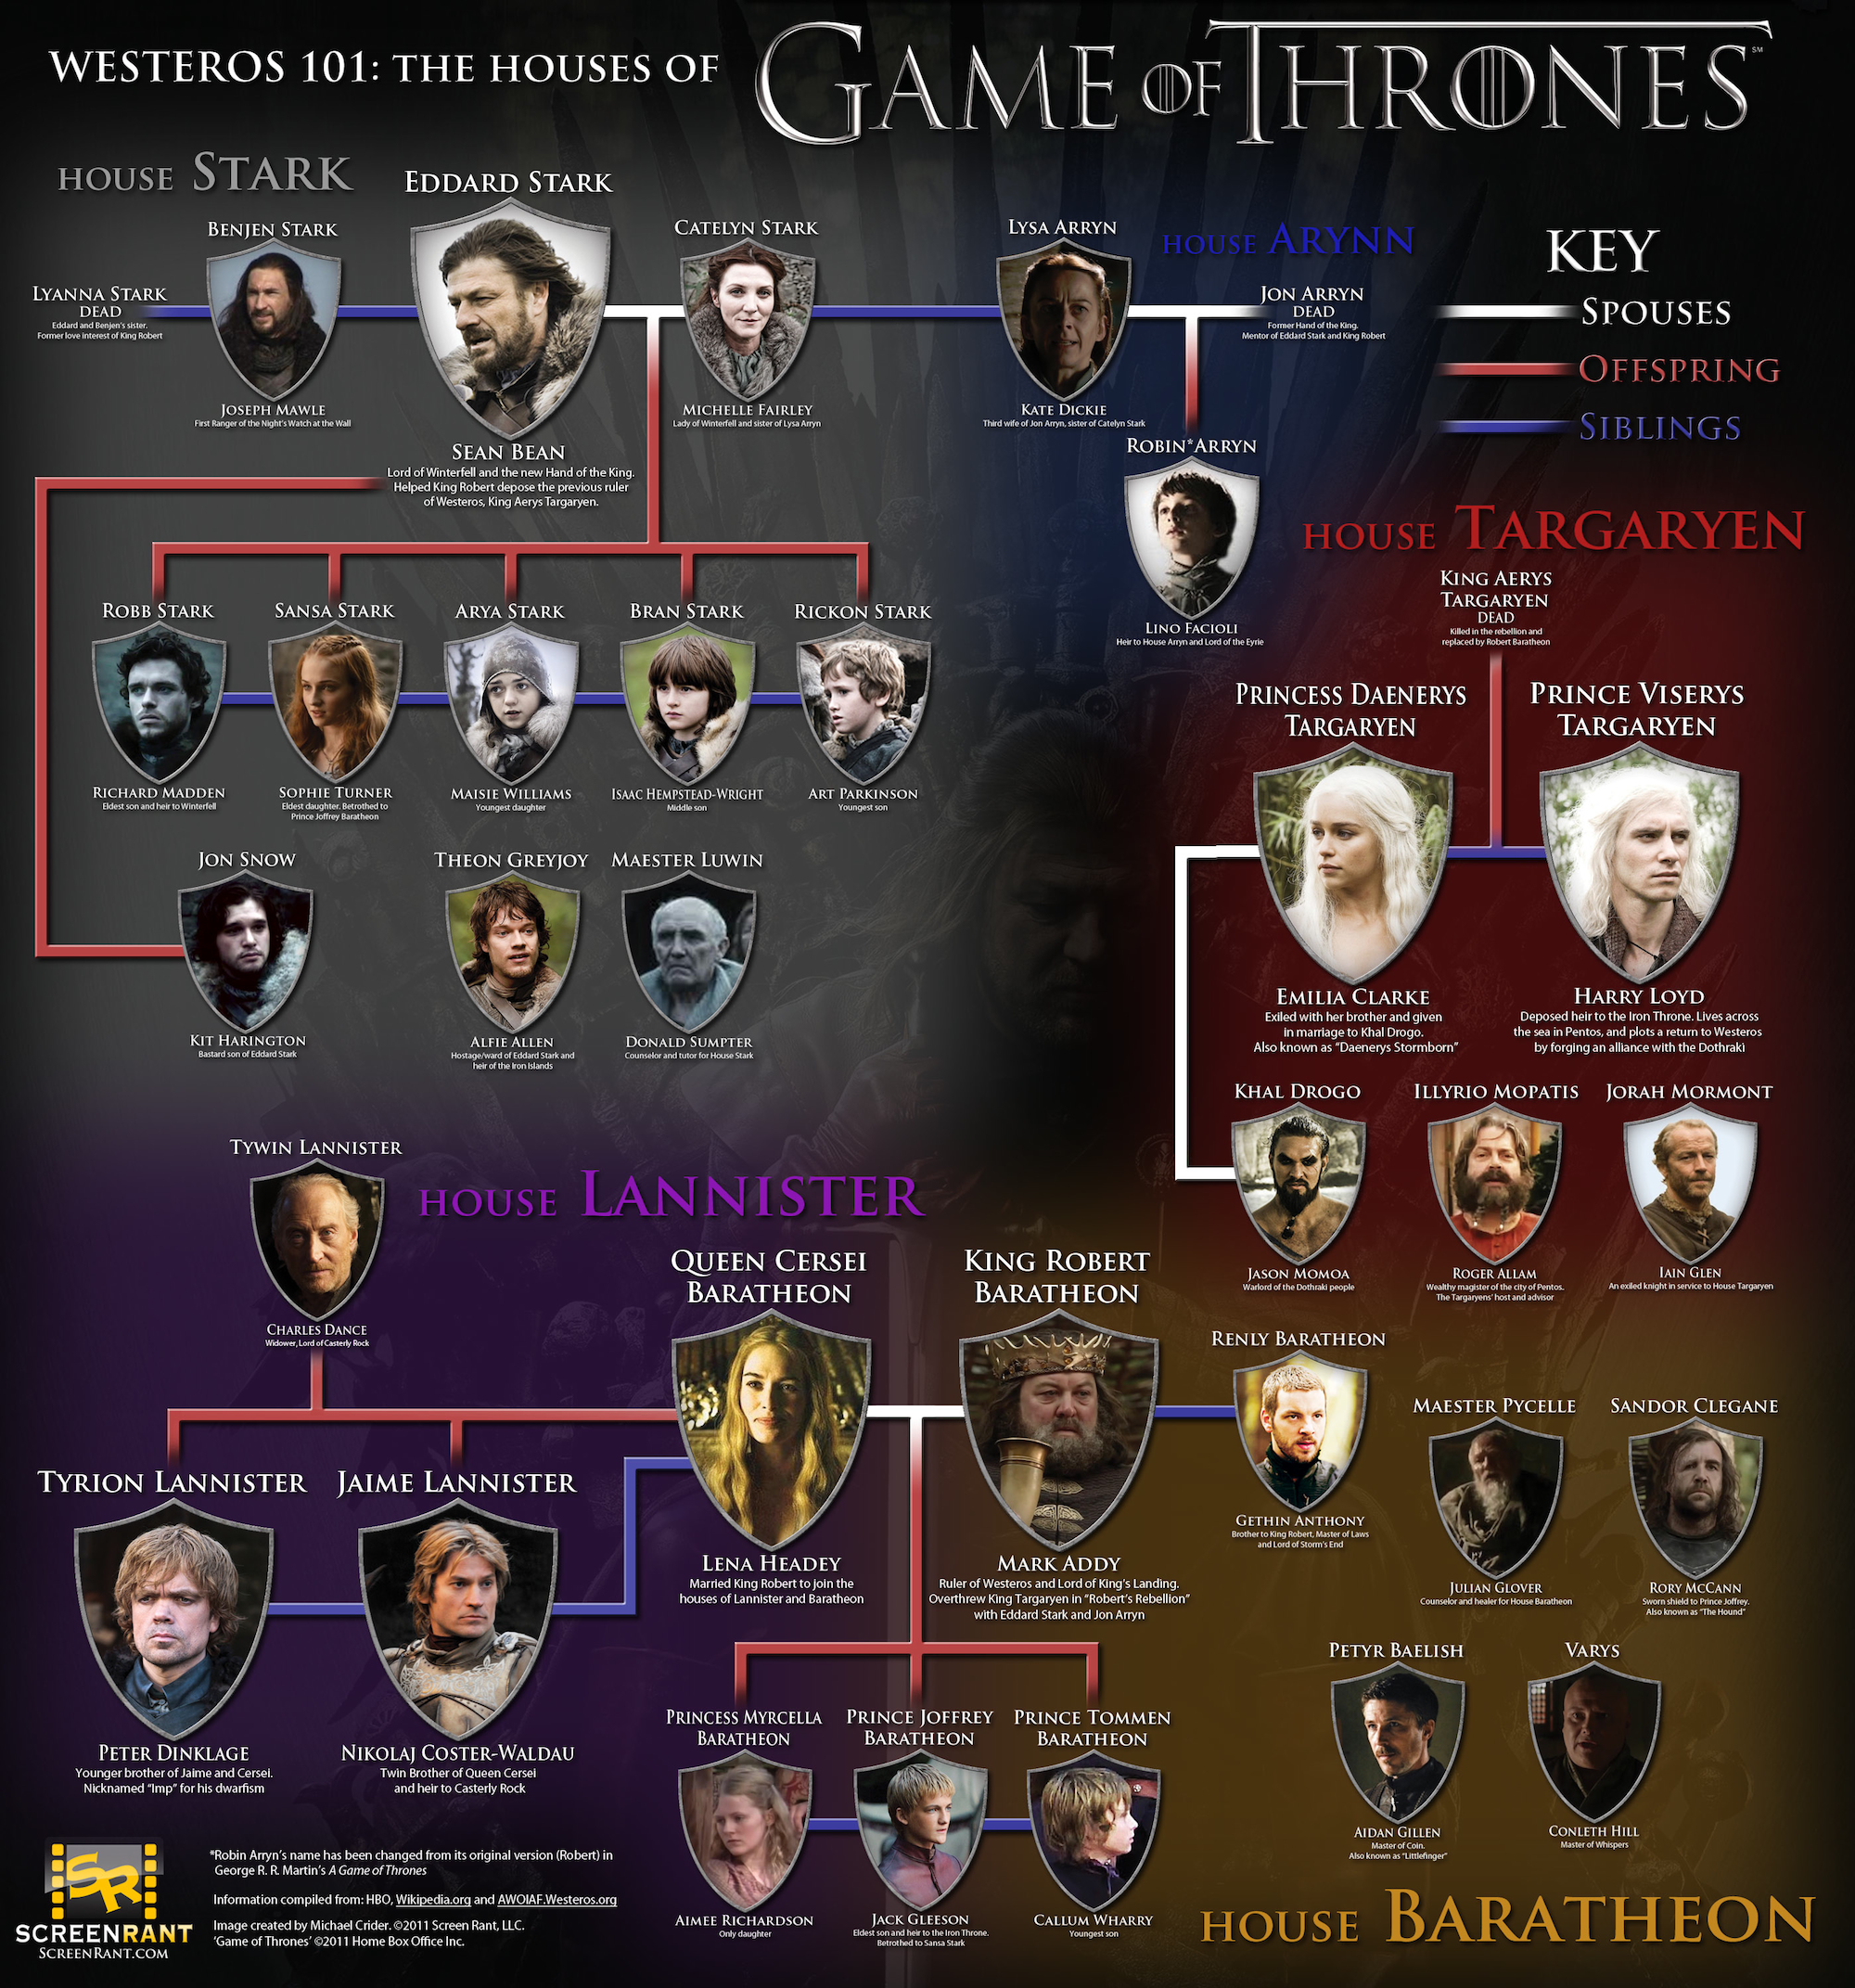 westeros-101-the-houses-of-game-of-thrones-infographic-01.jpg